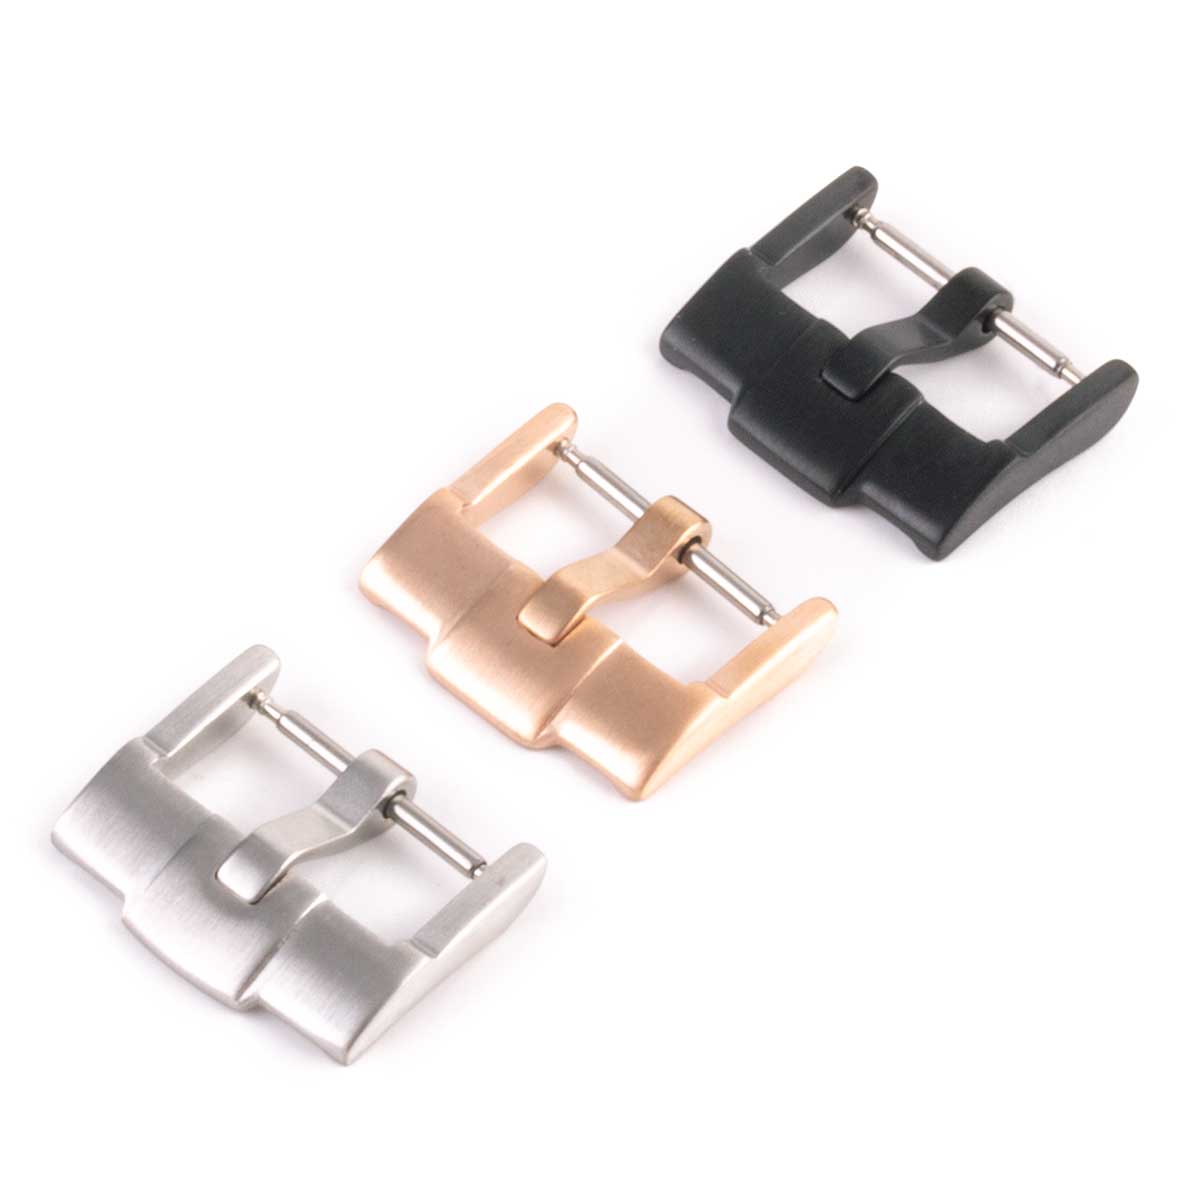 ABP tang buckle option compatible with Audemars Piguet watches